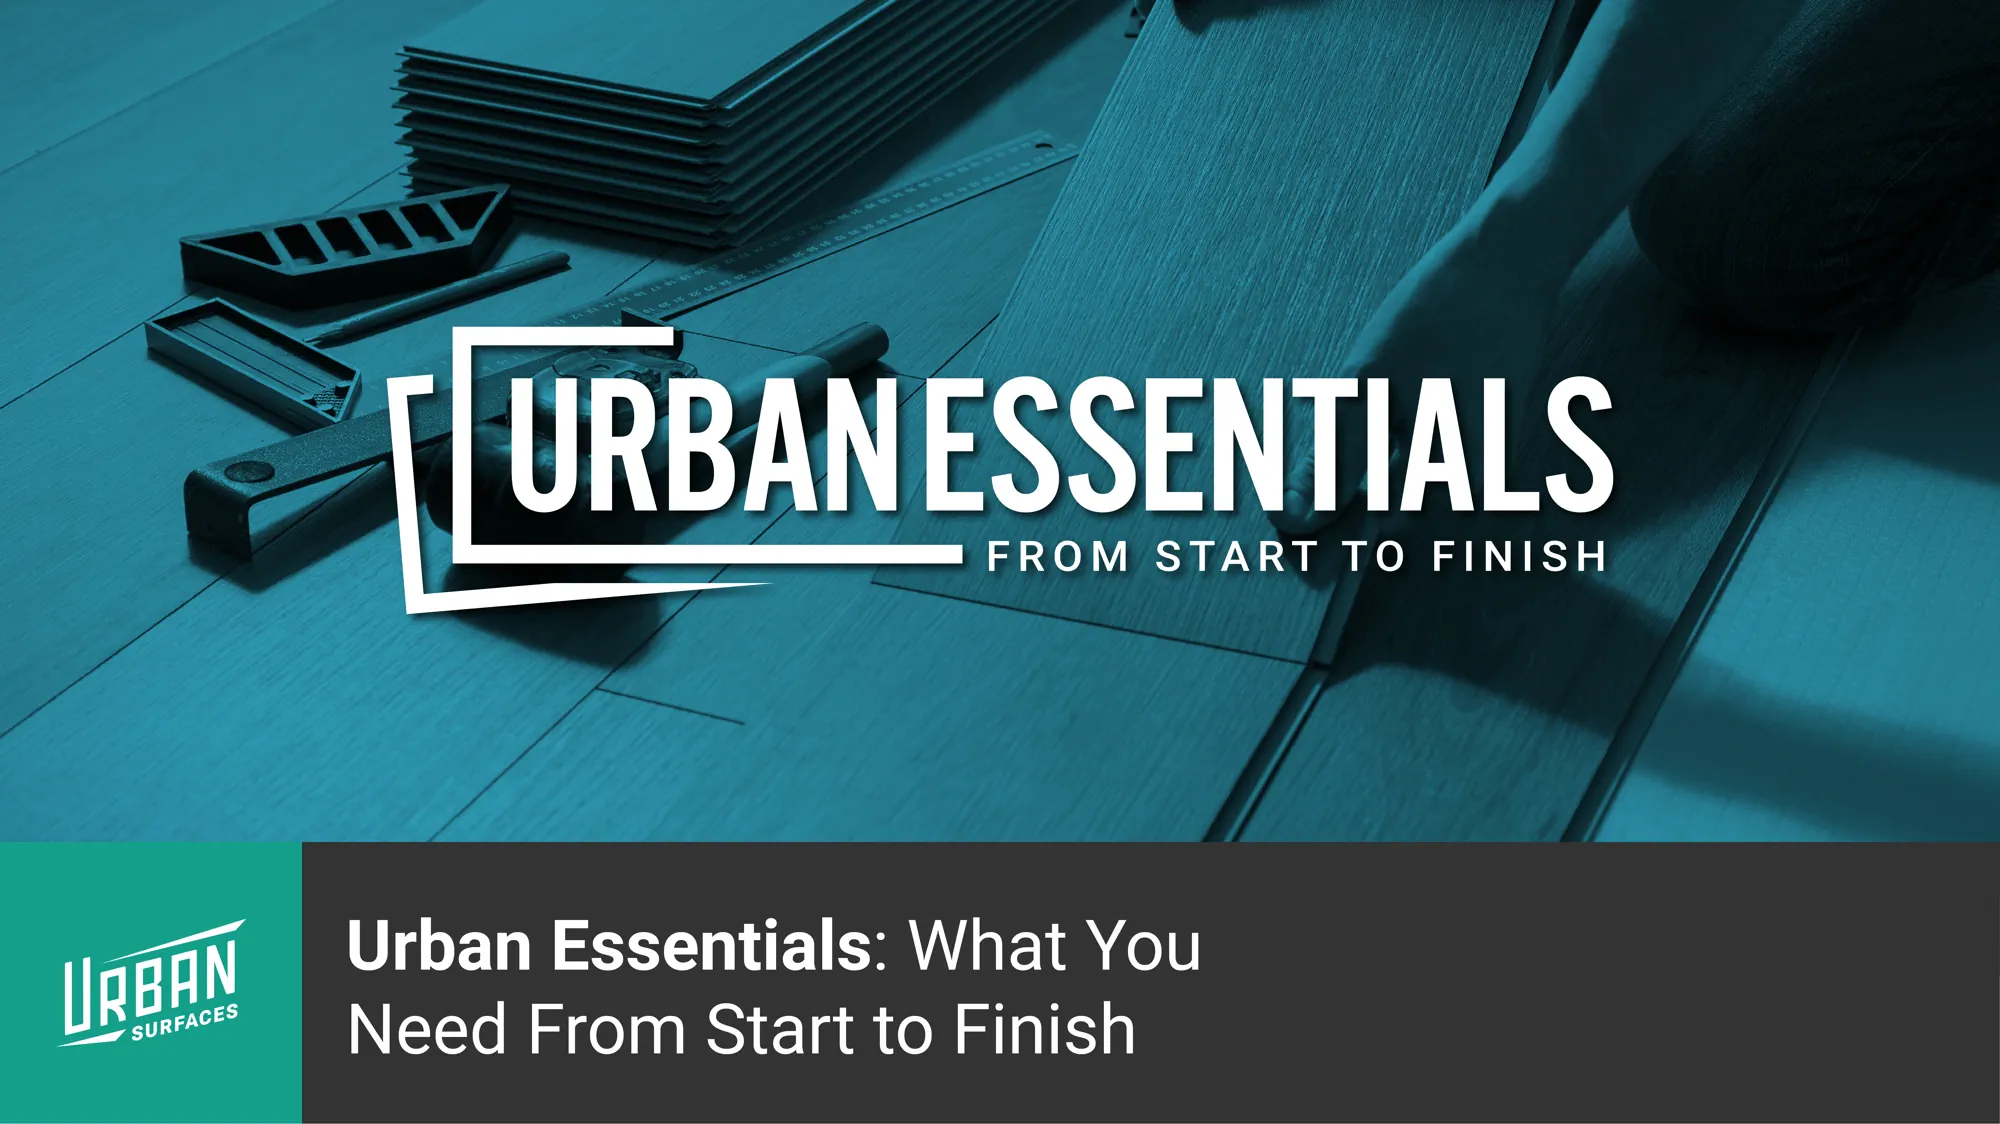 Logo for Urban Essentials on stylized background showing flooring installation tools and planks. Urban Essentials: What you need from start to finish.